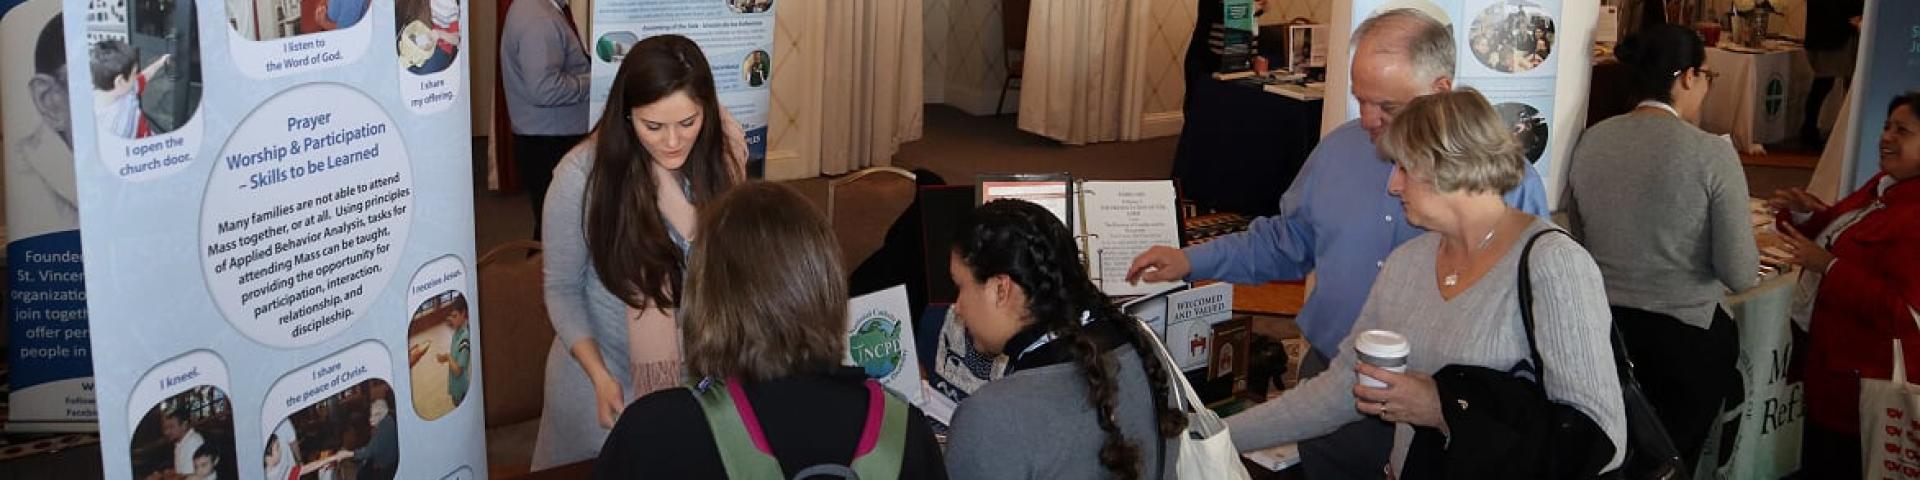 NCPD displaying information at a conference with partner organizations 